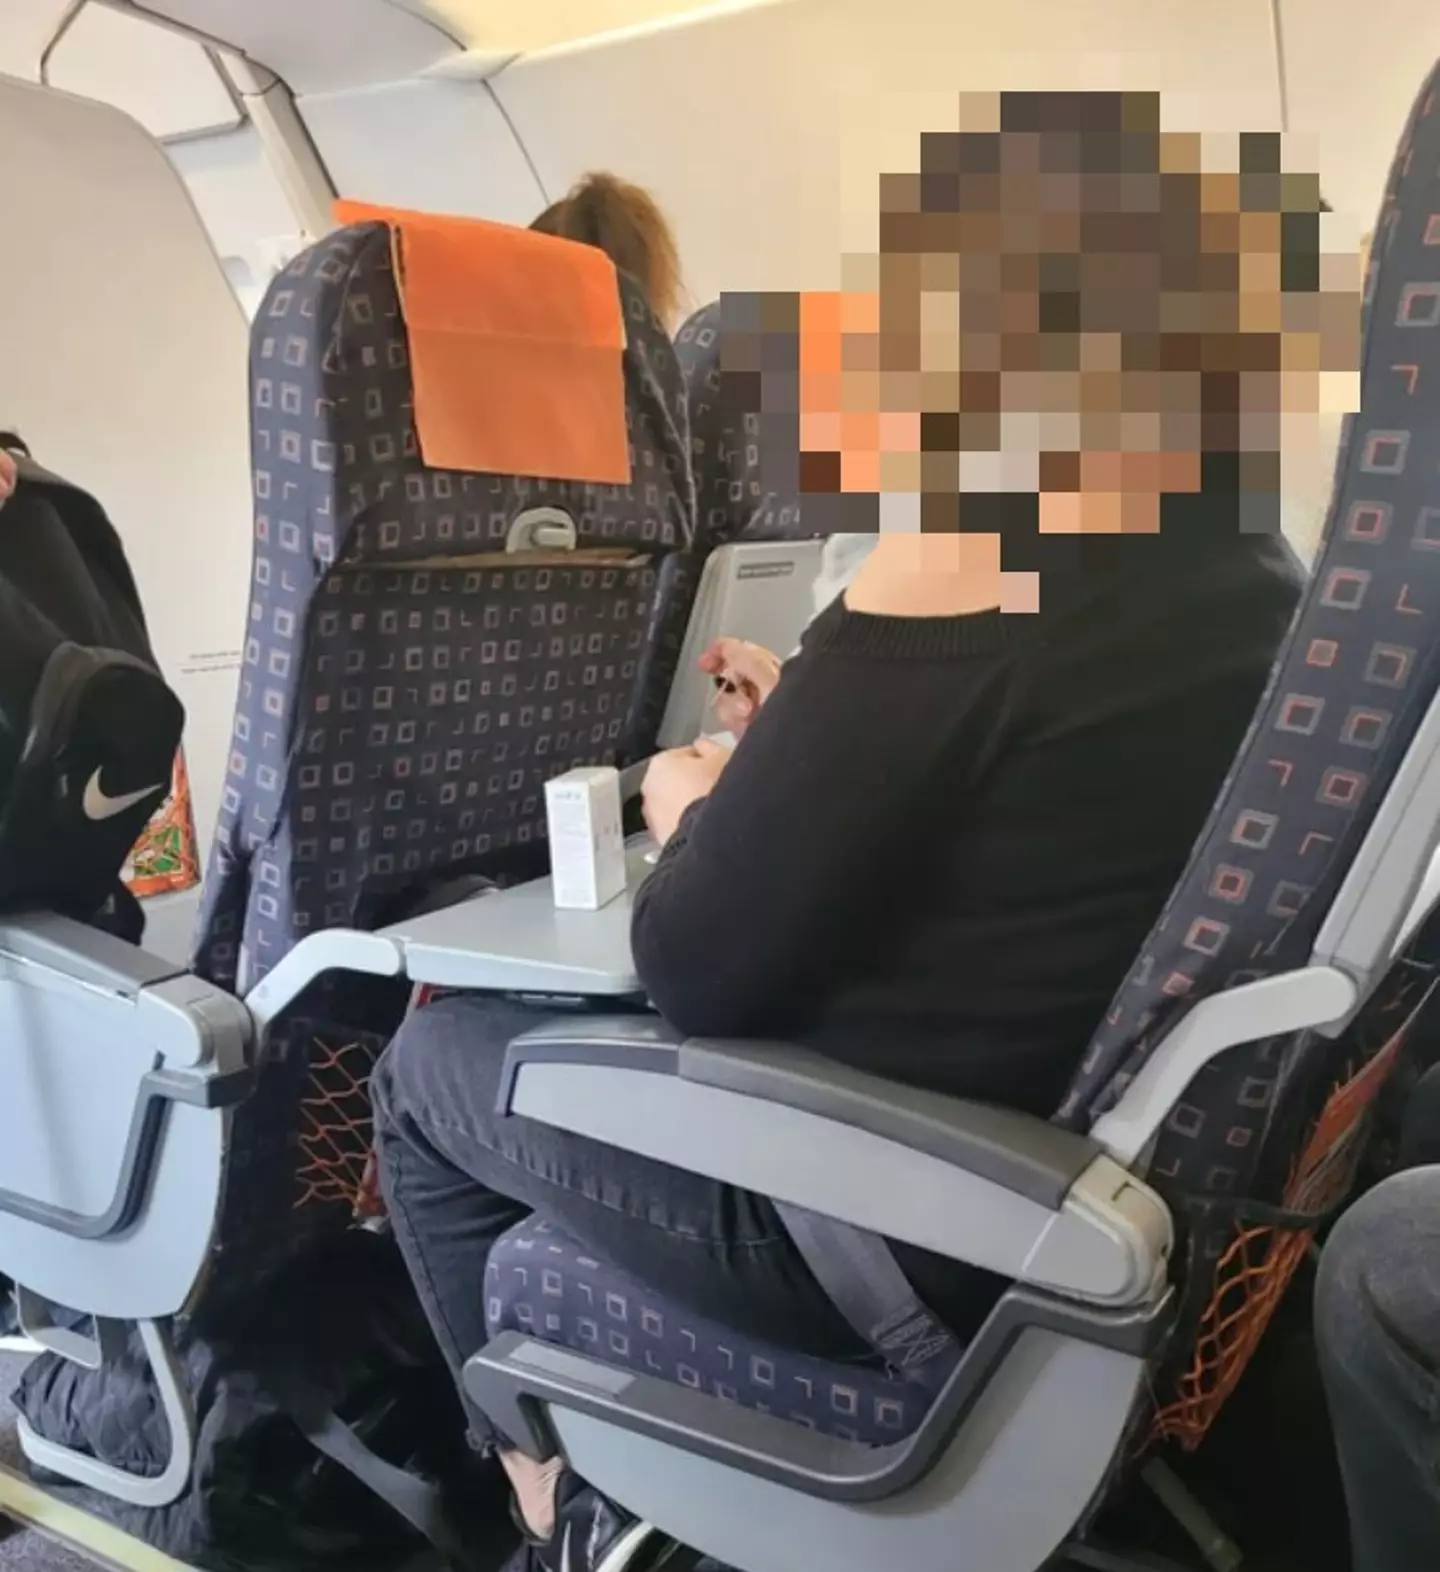 The woman was doing her nails on the plane.